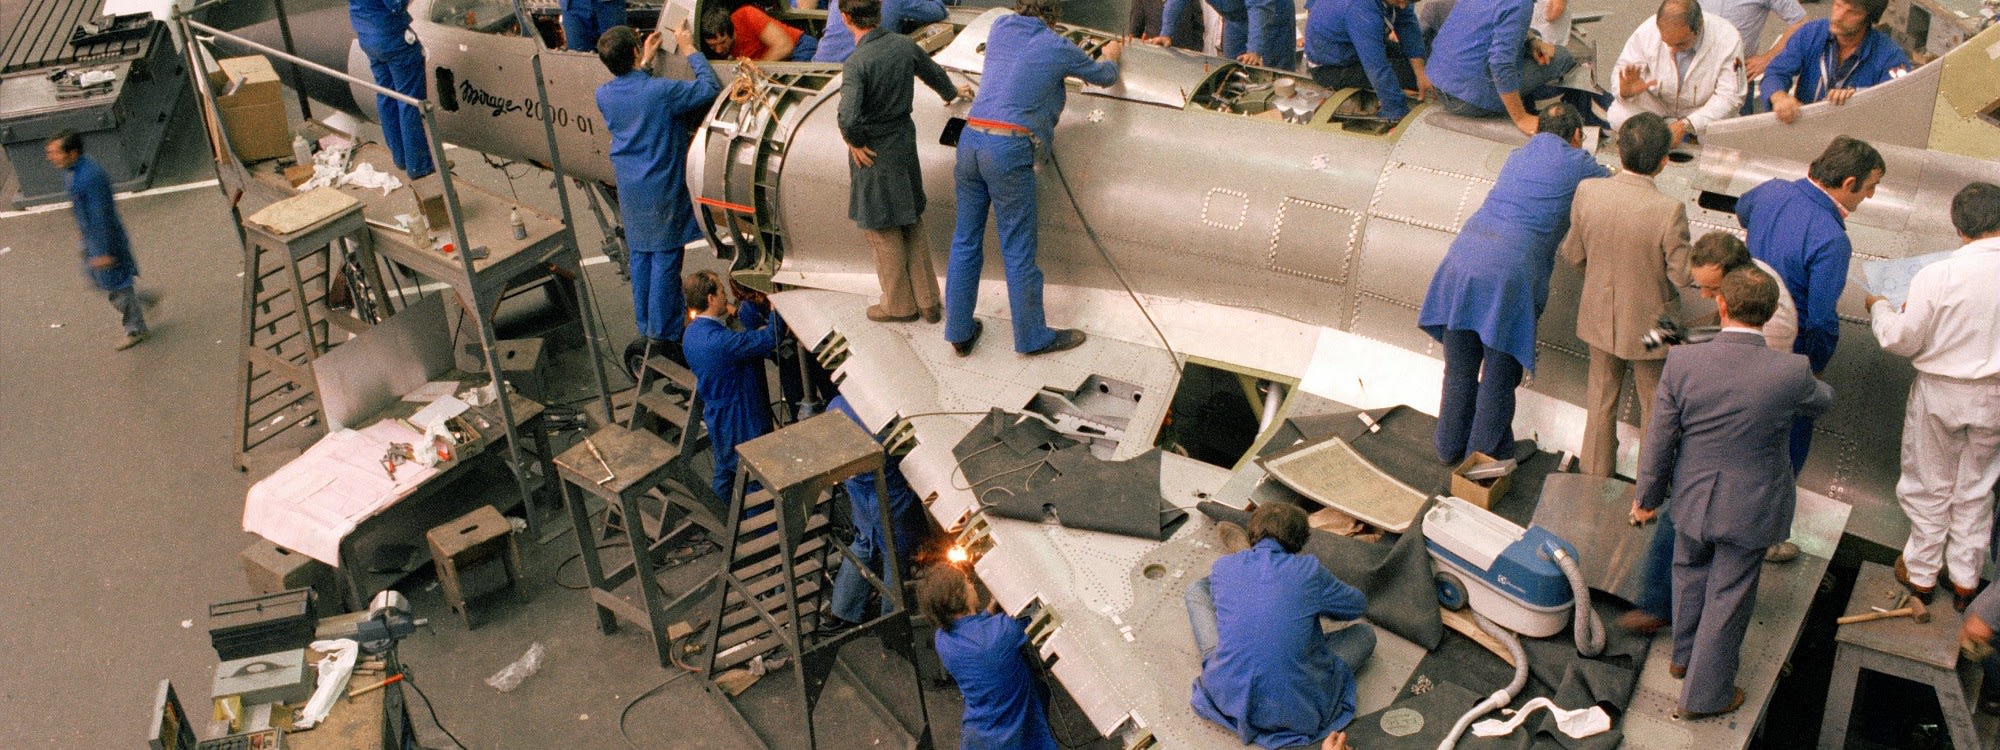 Fabrication of Mirage 2000 prototype in 1977 in the workshop